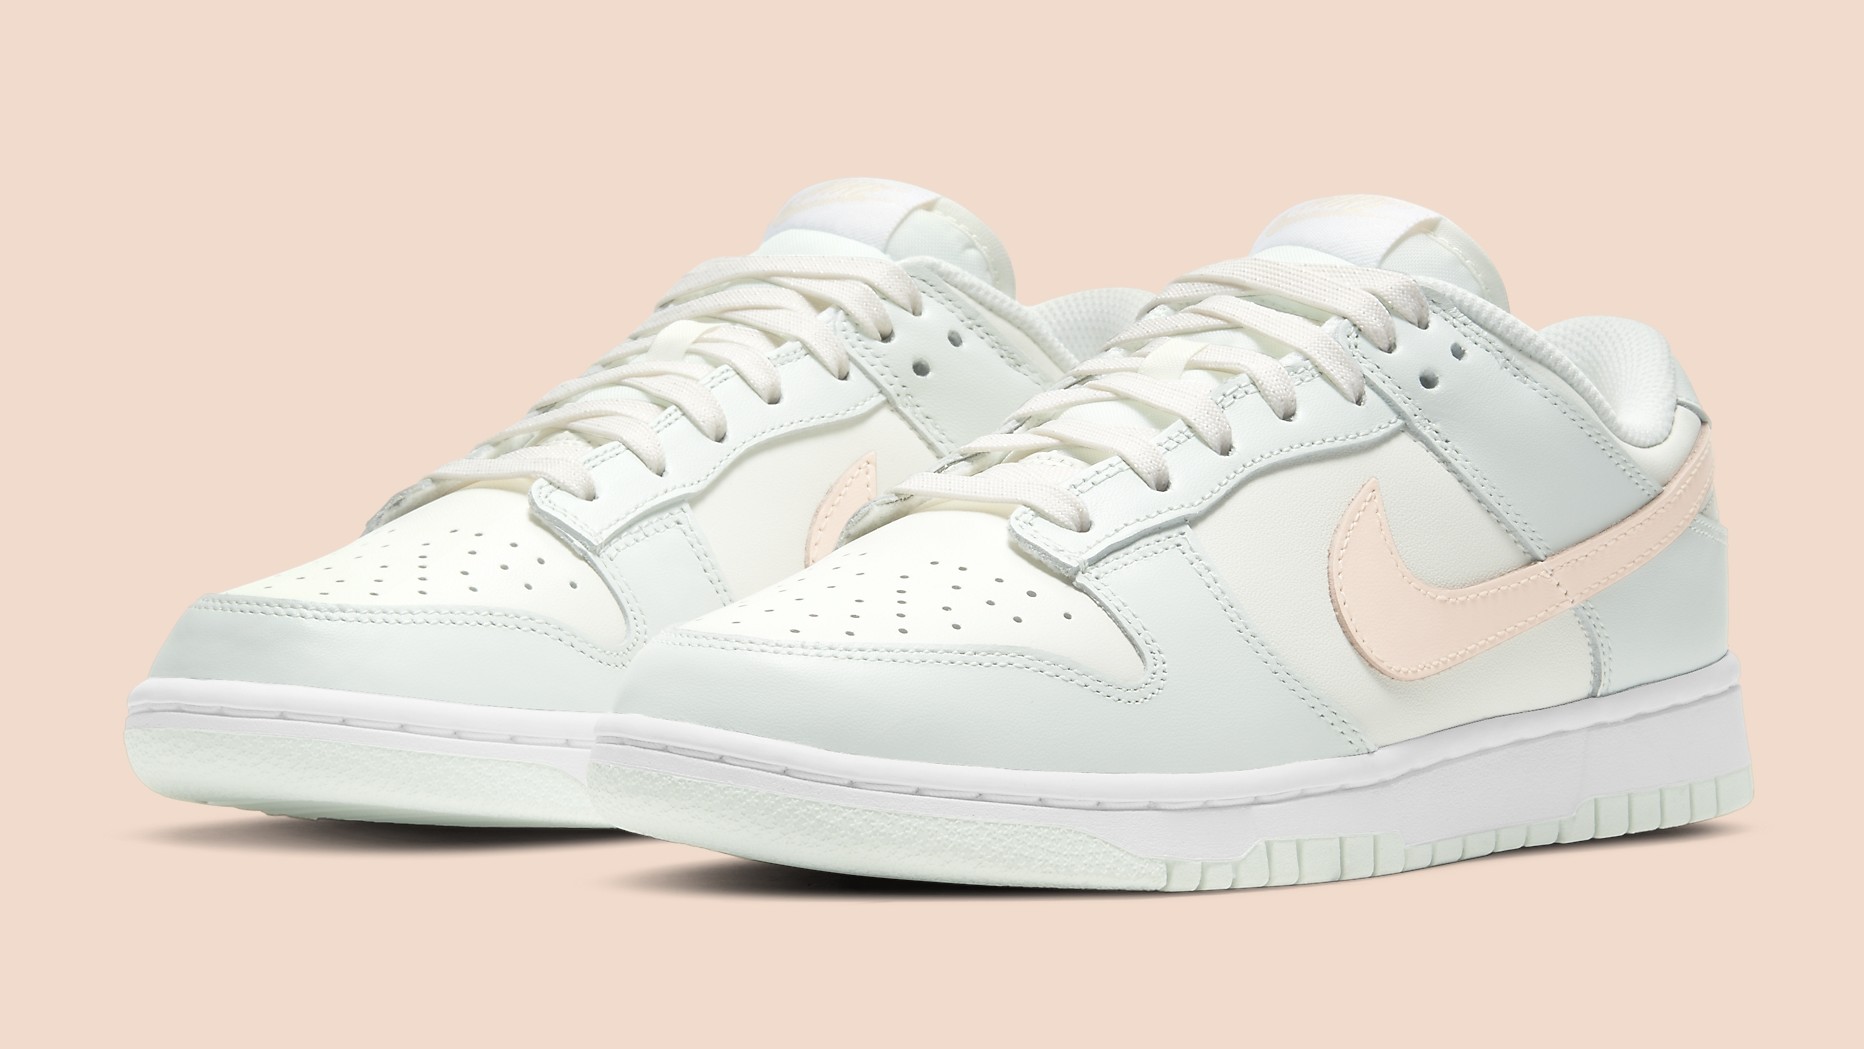 Another Women's Exclusive Nike Dunk Is Releasing This Month | Complex